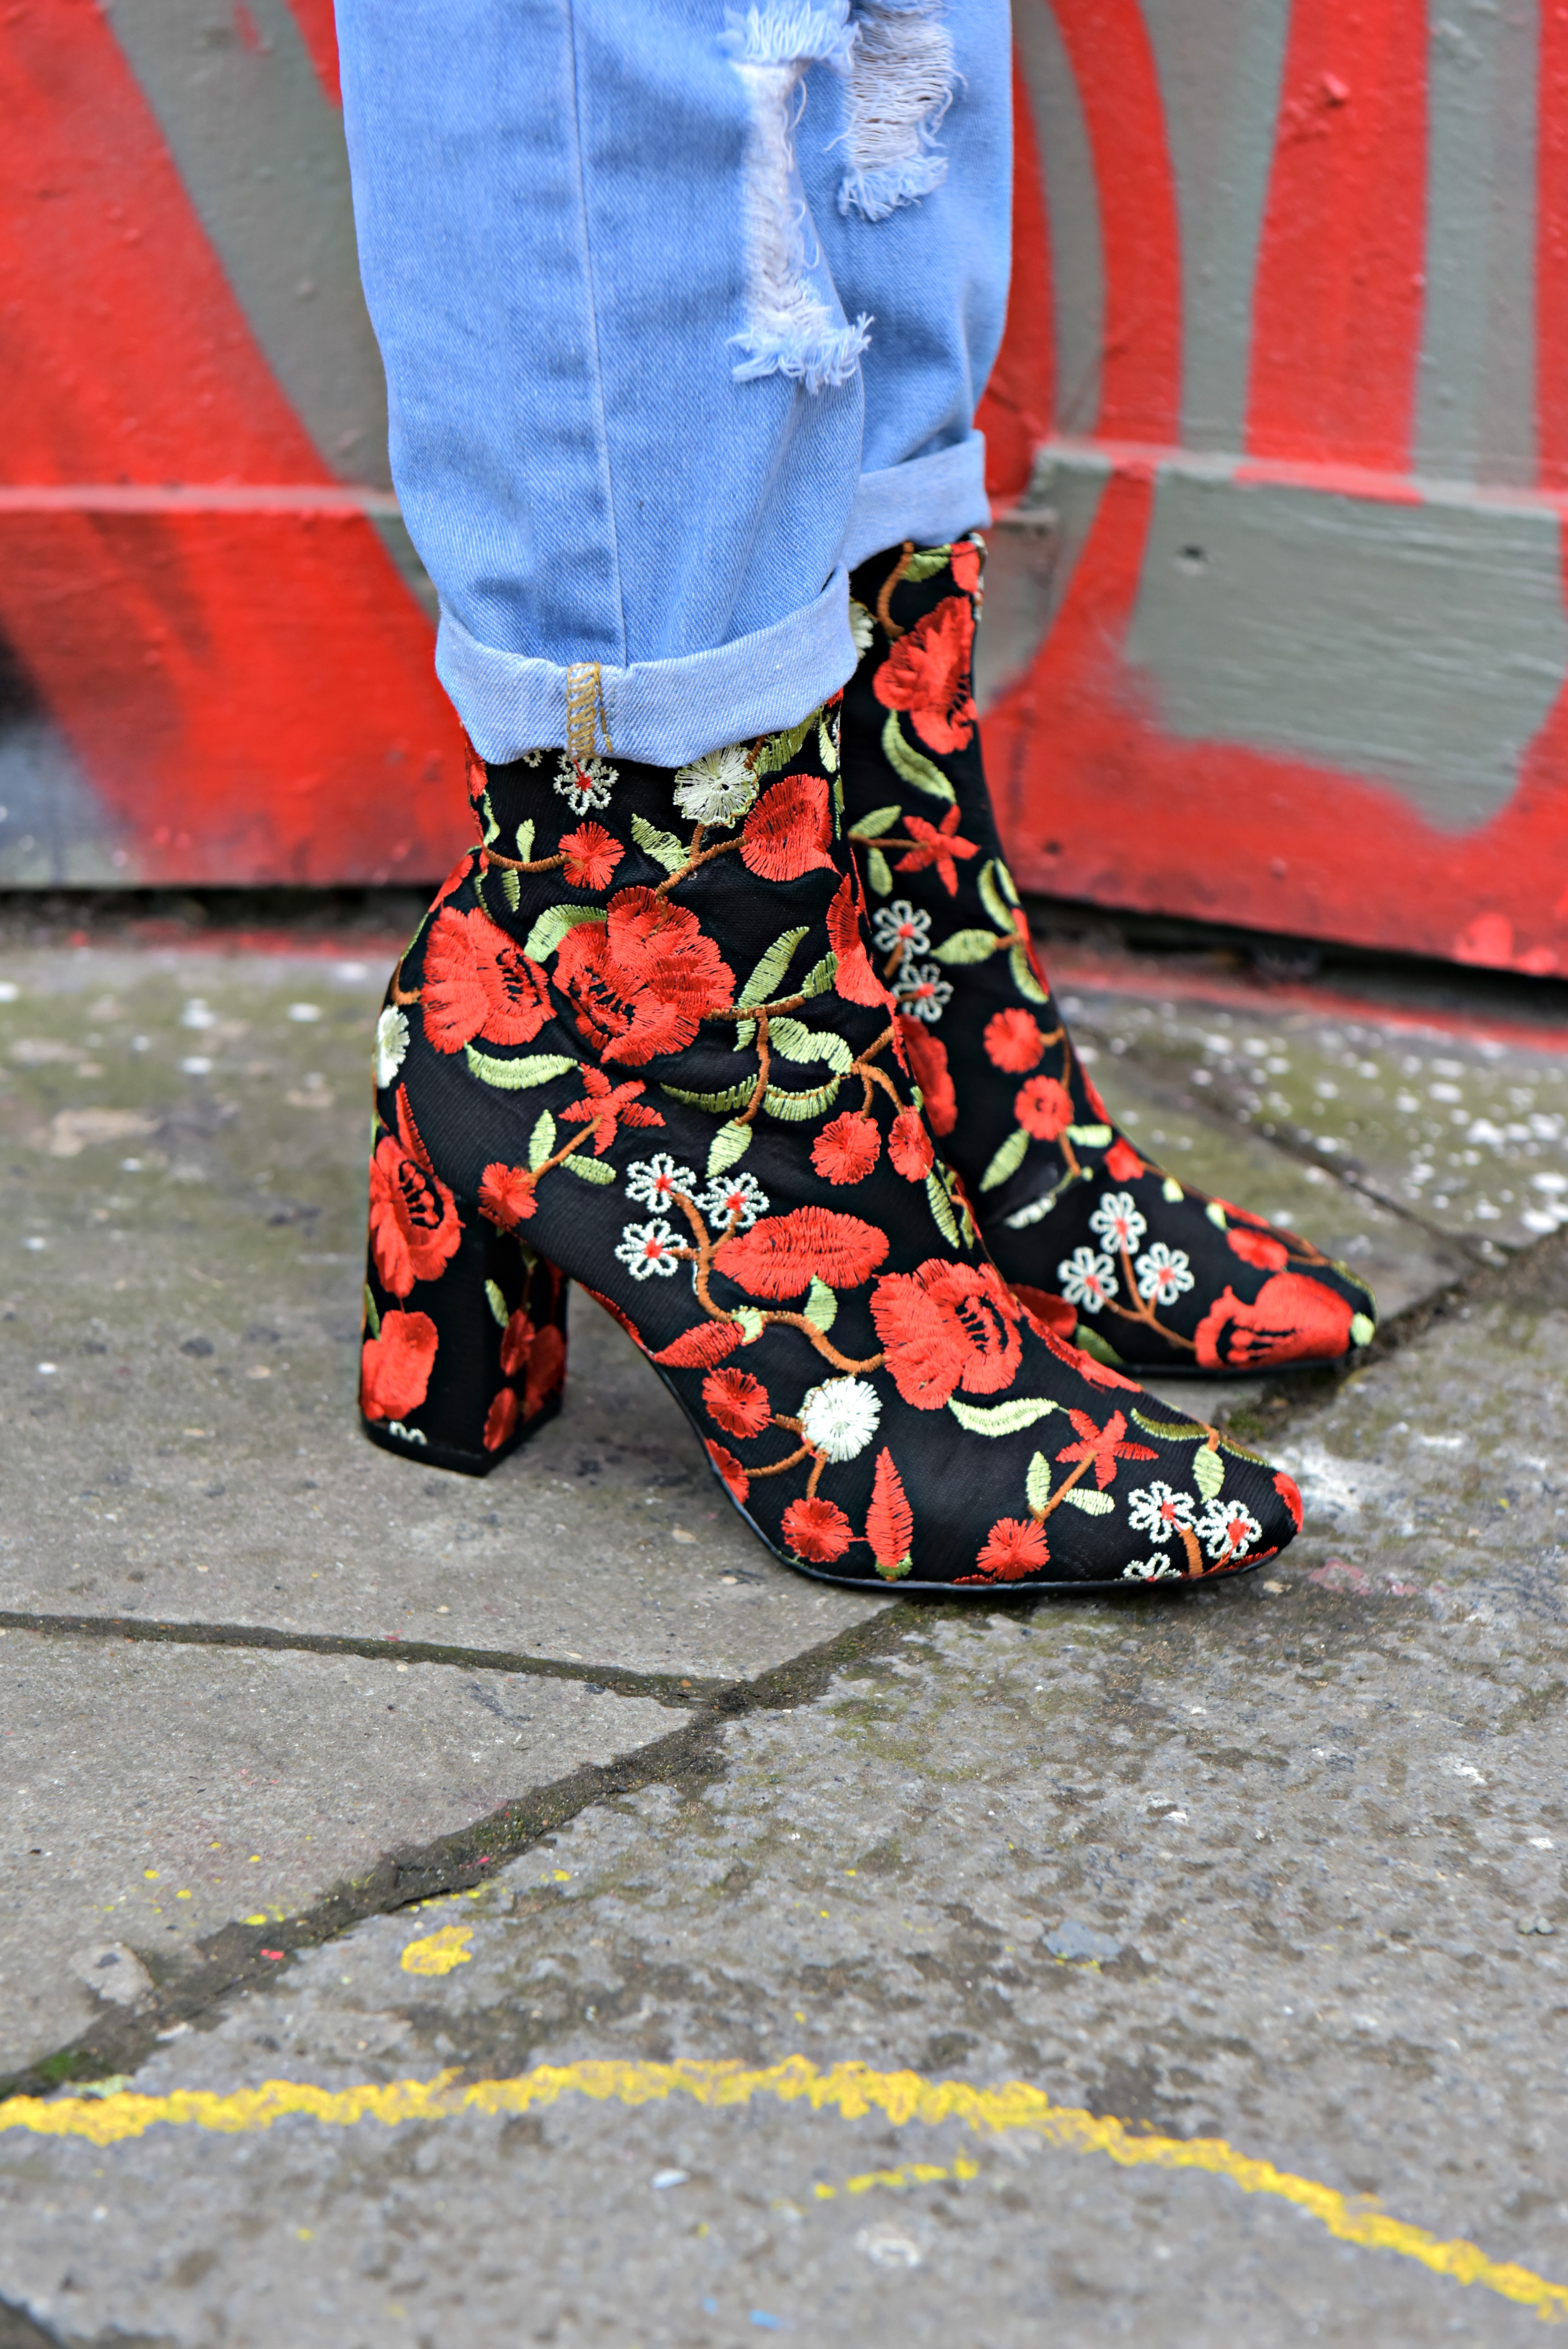 <img src="ana.jpg" alt="ana embroidered ankle boots"> 